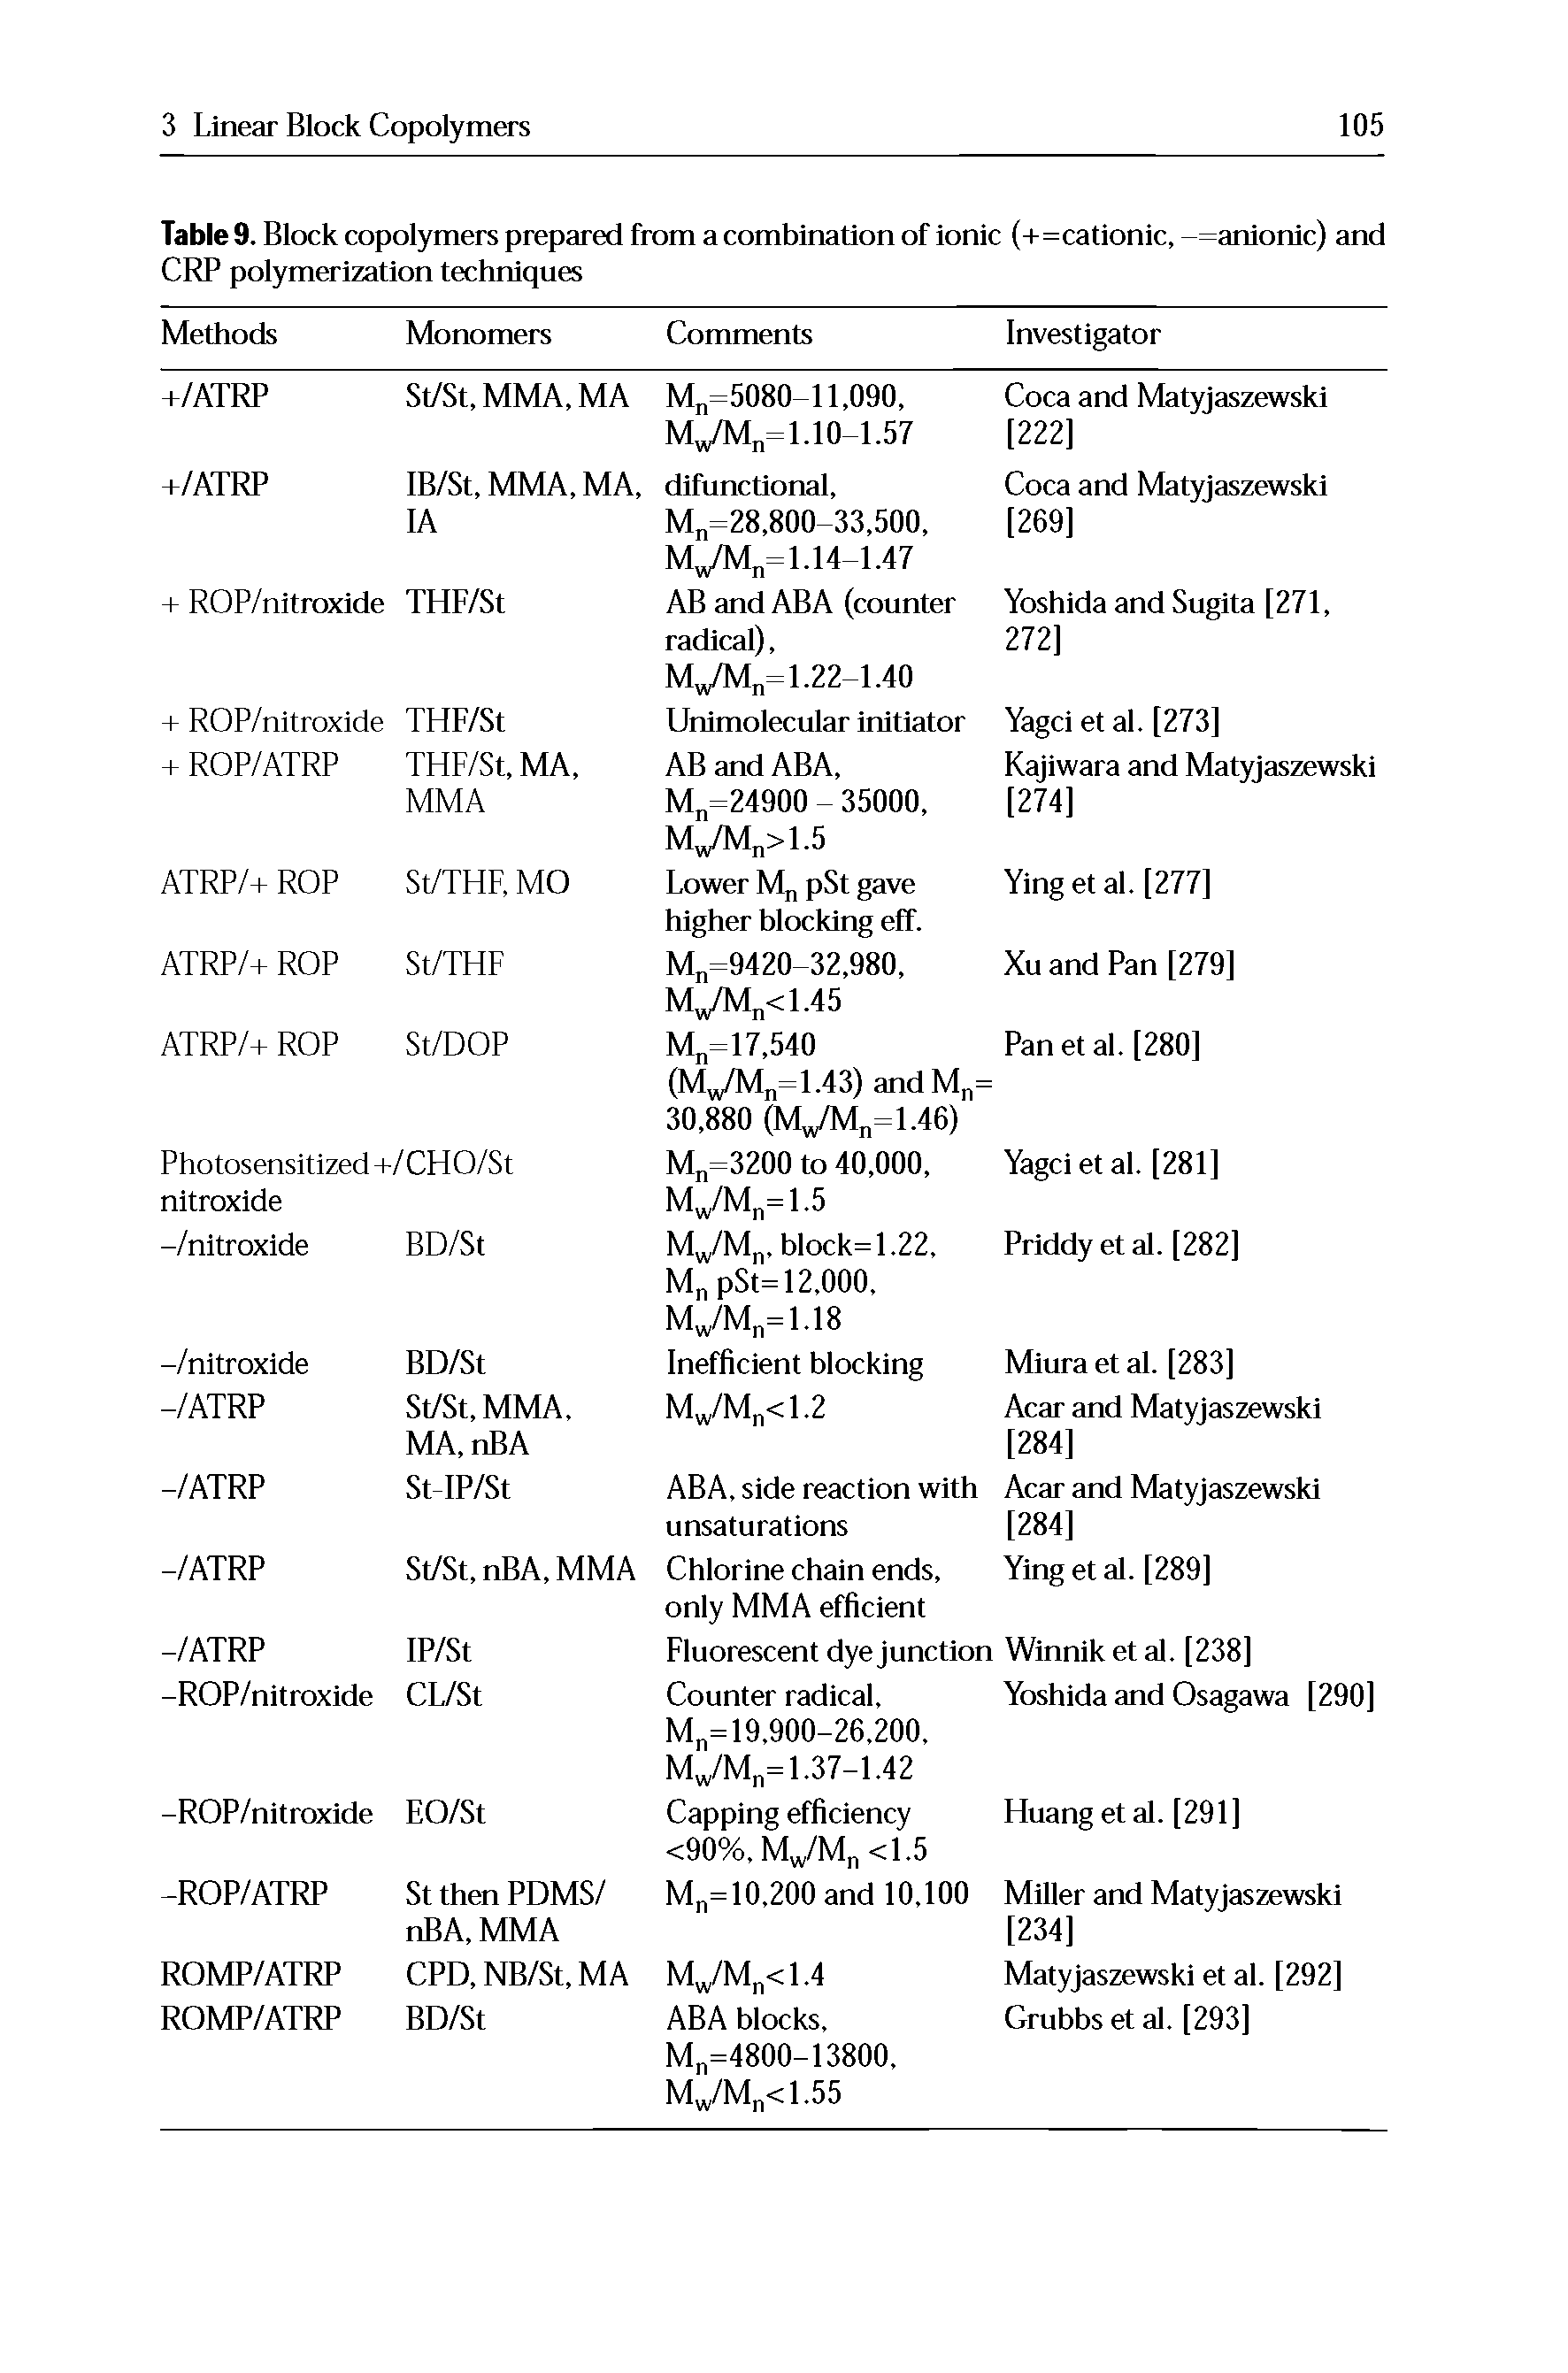 Table 9. Block copolymers prepared from a combination of ionic (+=cationic, -=anionic) and CRP polymerization techniques ...